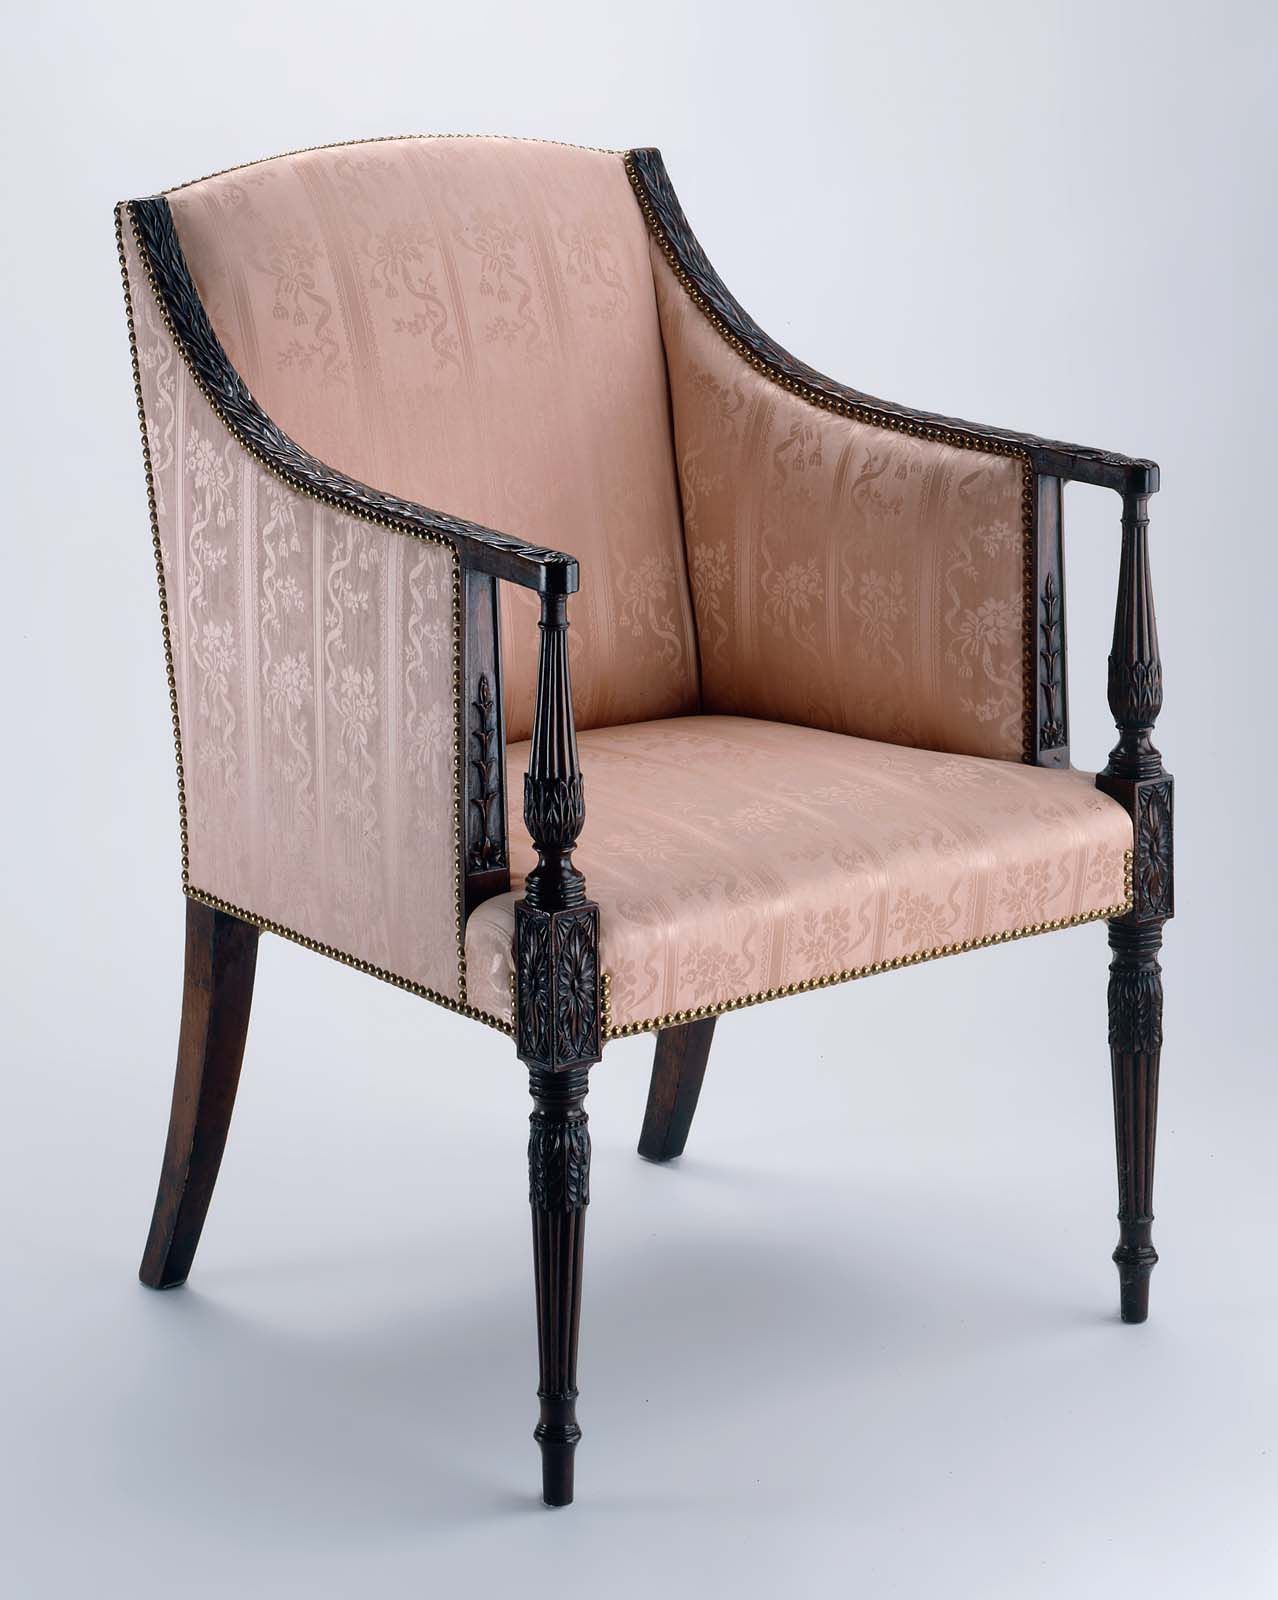 Upholstered Armchair | Upholstered Swivel Chairs Inside Armory Fabric Armchairs (View 7 of 15)